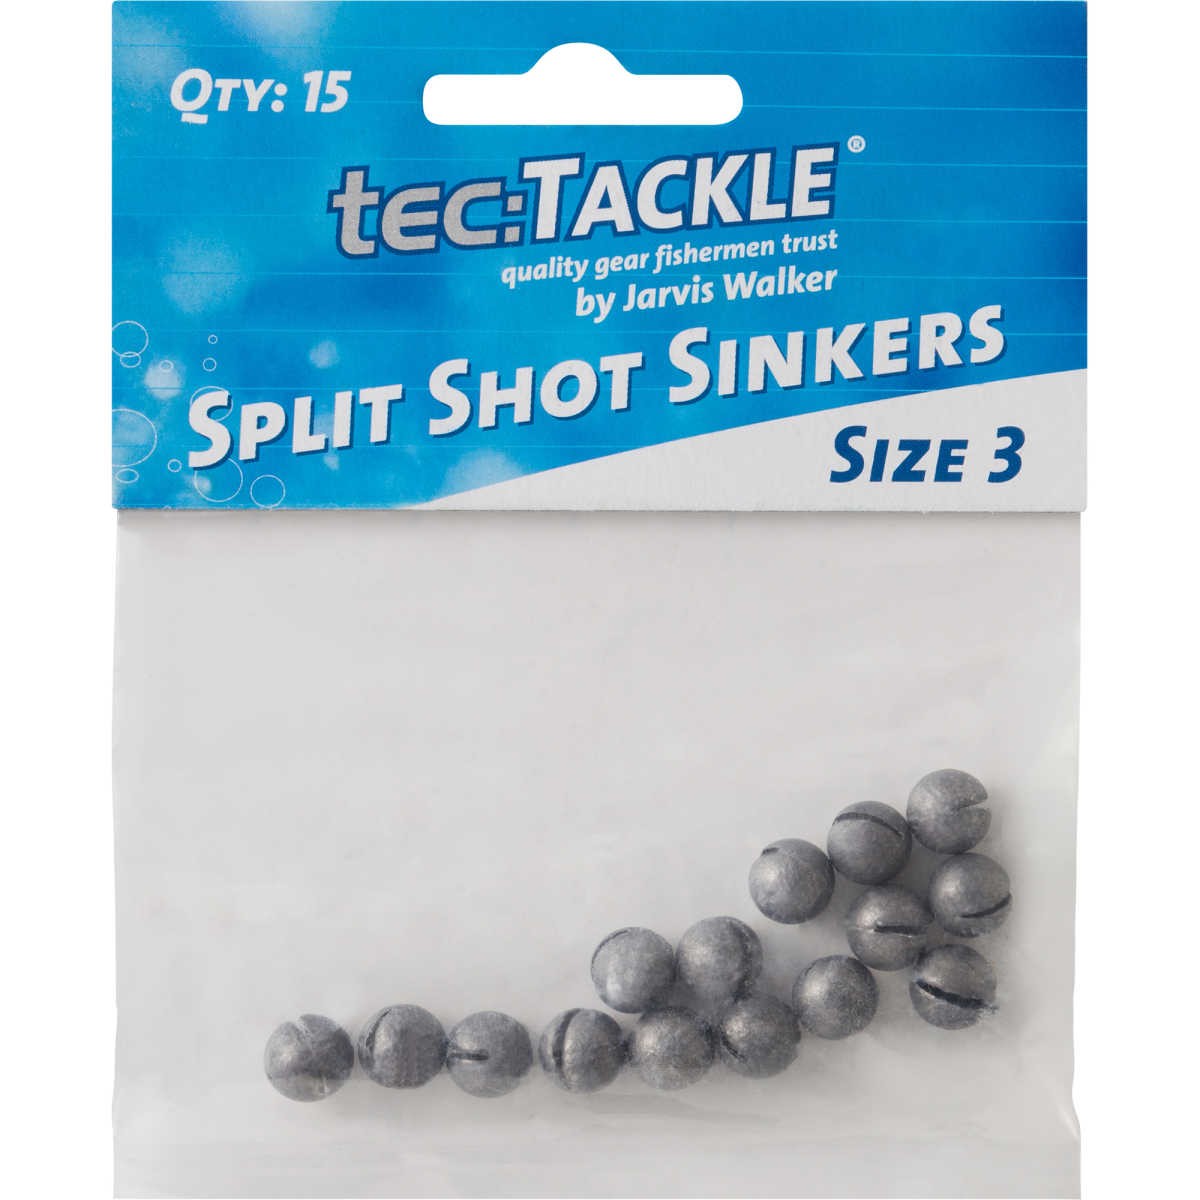 Tec:Tackle Split Shot Size 3 Qty 15 -  - Mansfield Hunting & Fishing - Products to prepare for Corona Virus